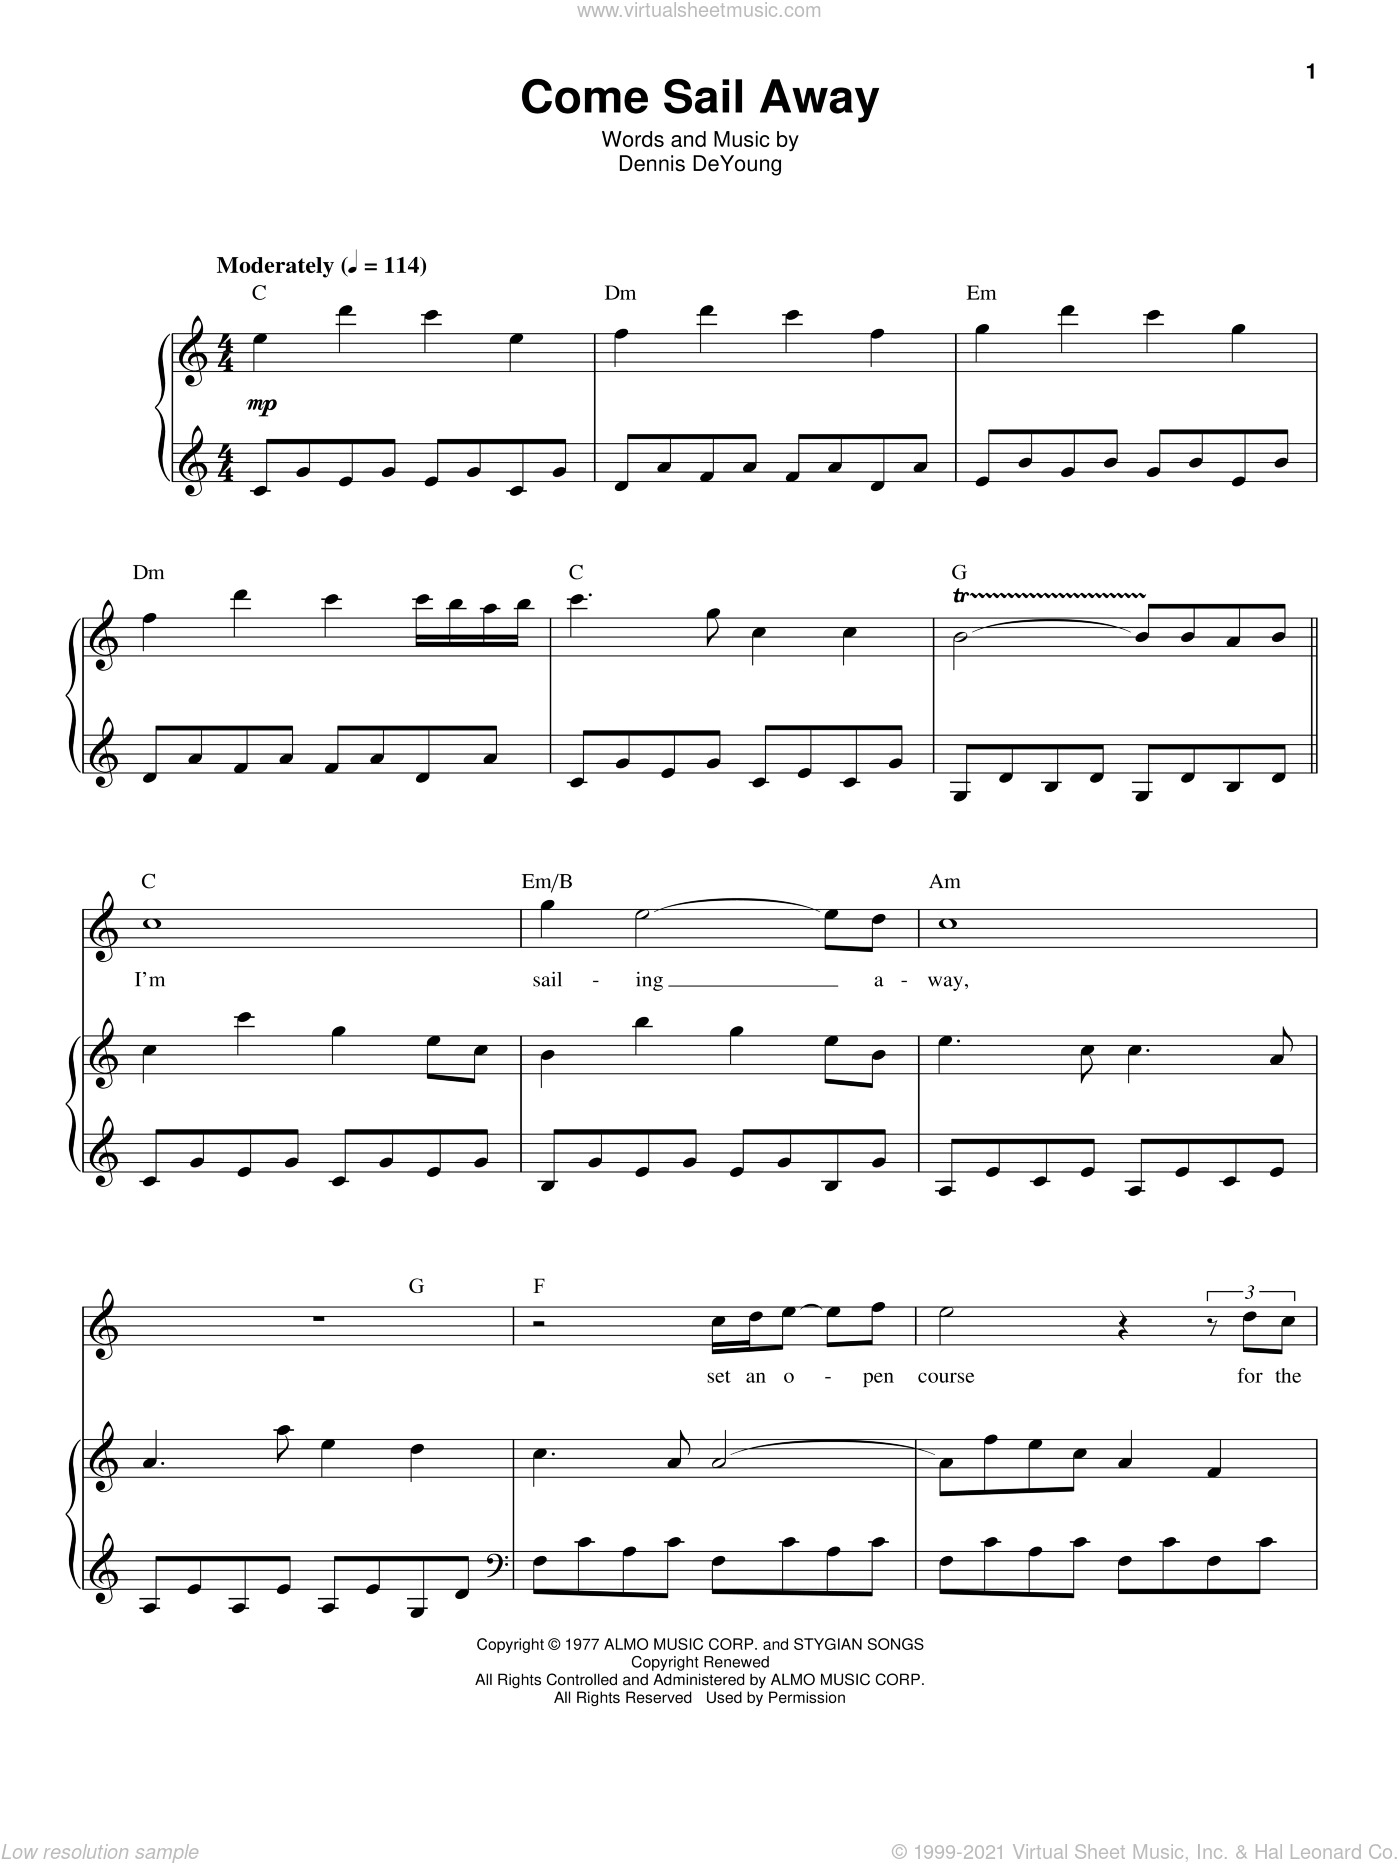 Styx Come Sail Away Sheet Music For Voice And Piano Pdf - halo 3 theme roblox piano